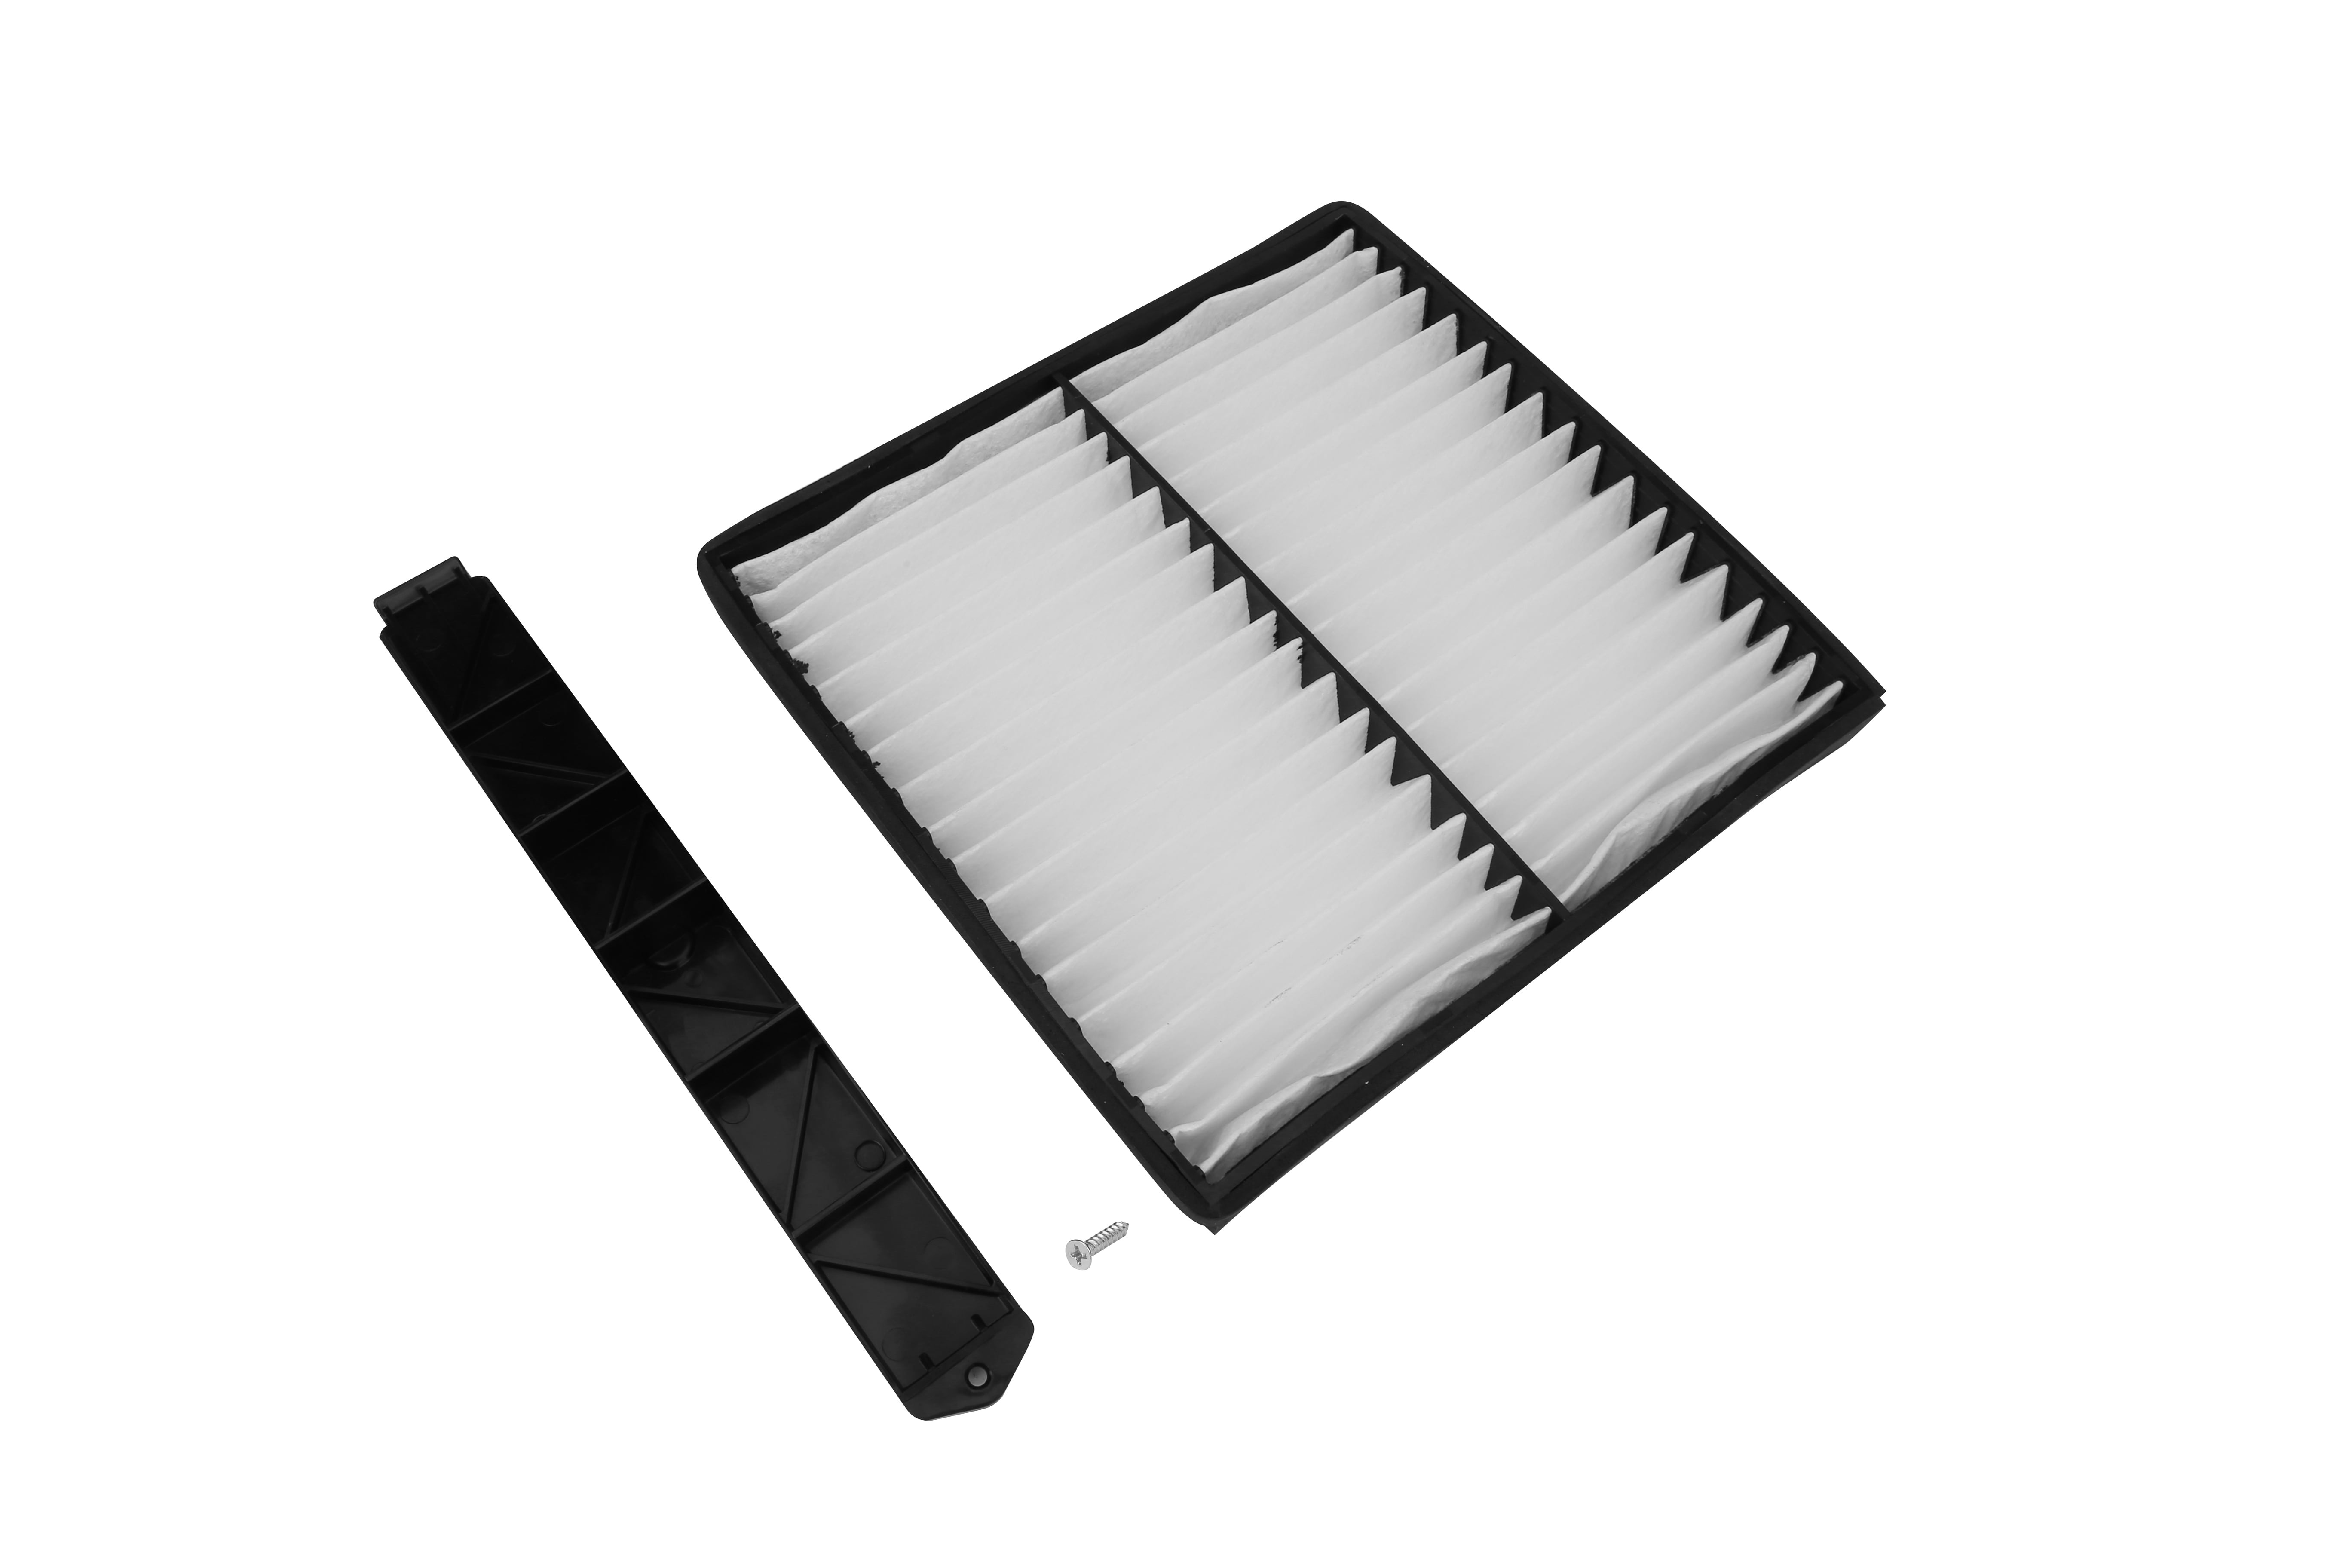 Silverado 22759208 Avalanche Replaces 259-200 103948 Suburban Yukon Cabin Air Filter Retrofit Kit Cadillac and GMC Vehicles Sierra Tahoe 22759203 Escalade Compatible with Chevy